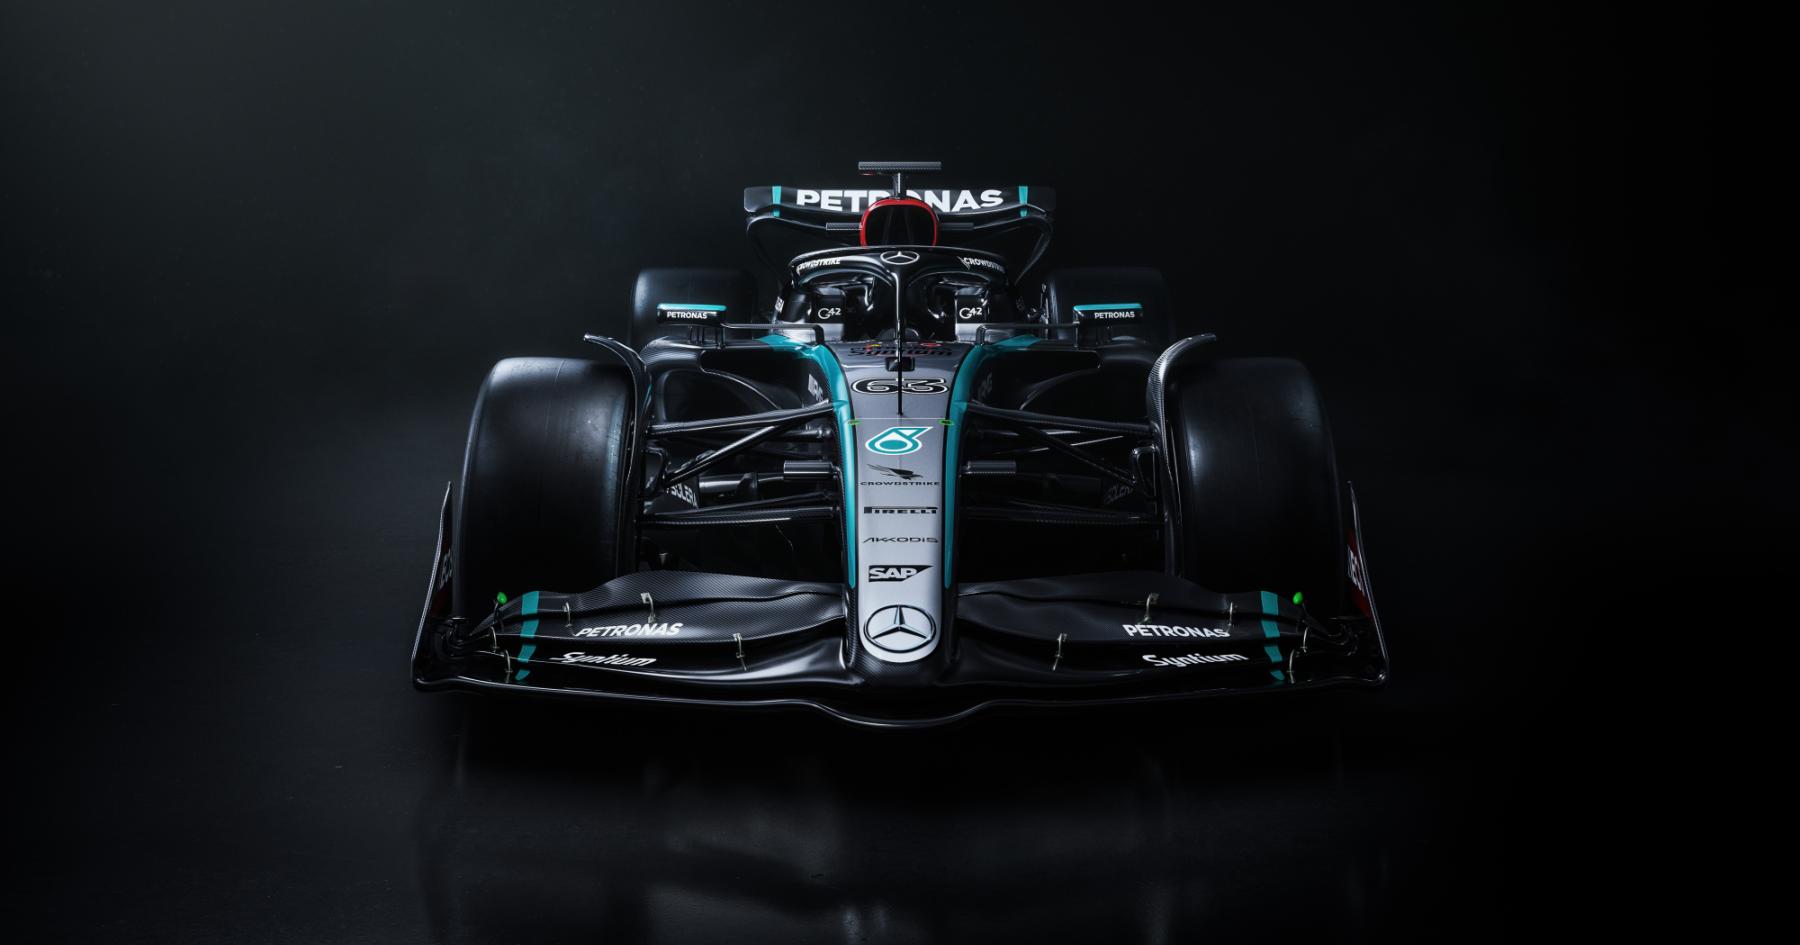 In pictures: First look at striking new-look Mercedes W15